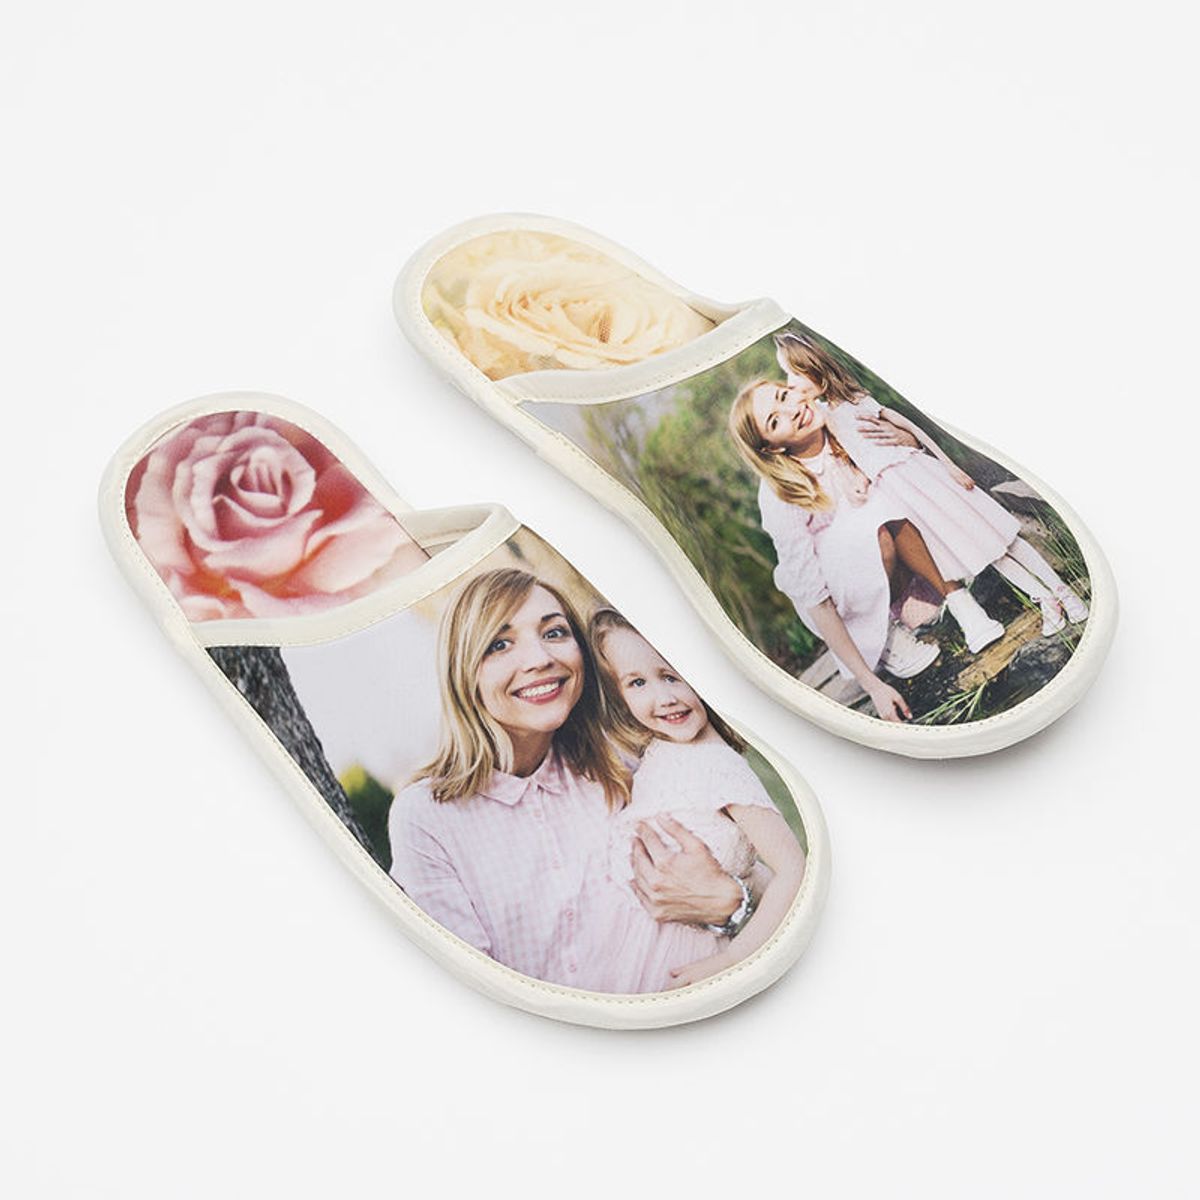 Printed Sliders Flip Flop Slippers (Pack Of 5 Sizes, 6 To 10